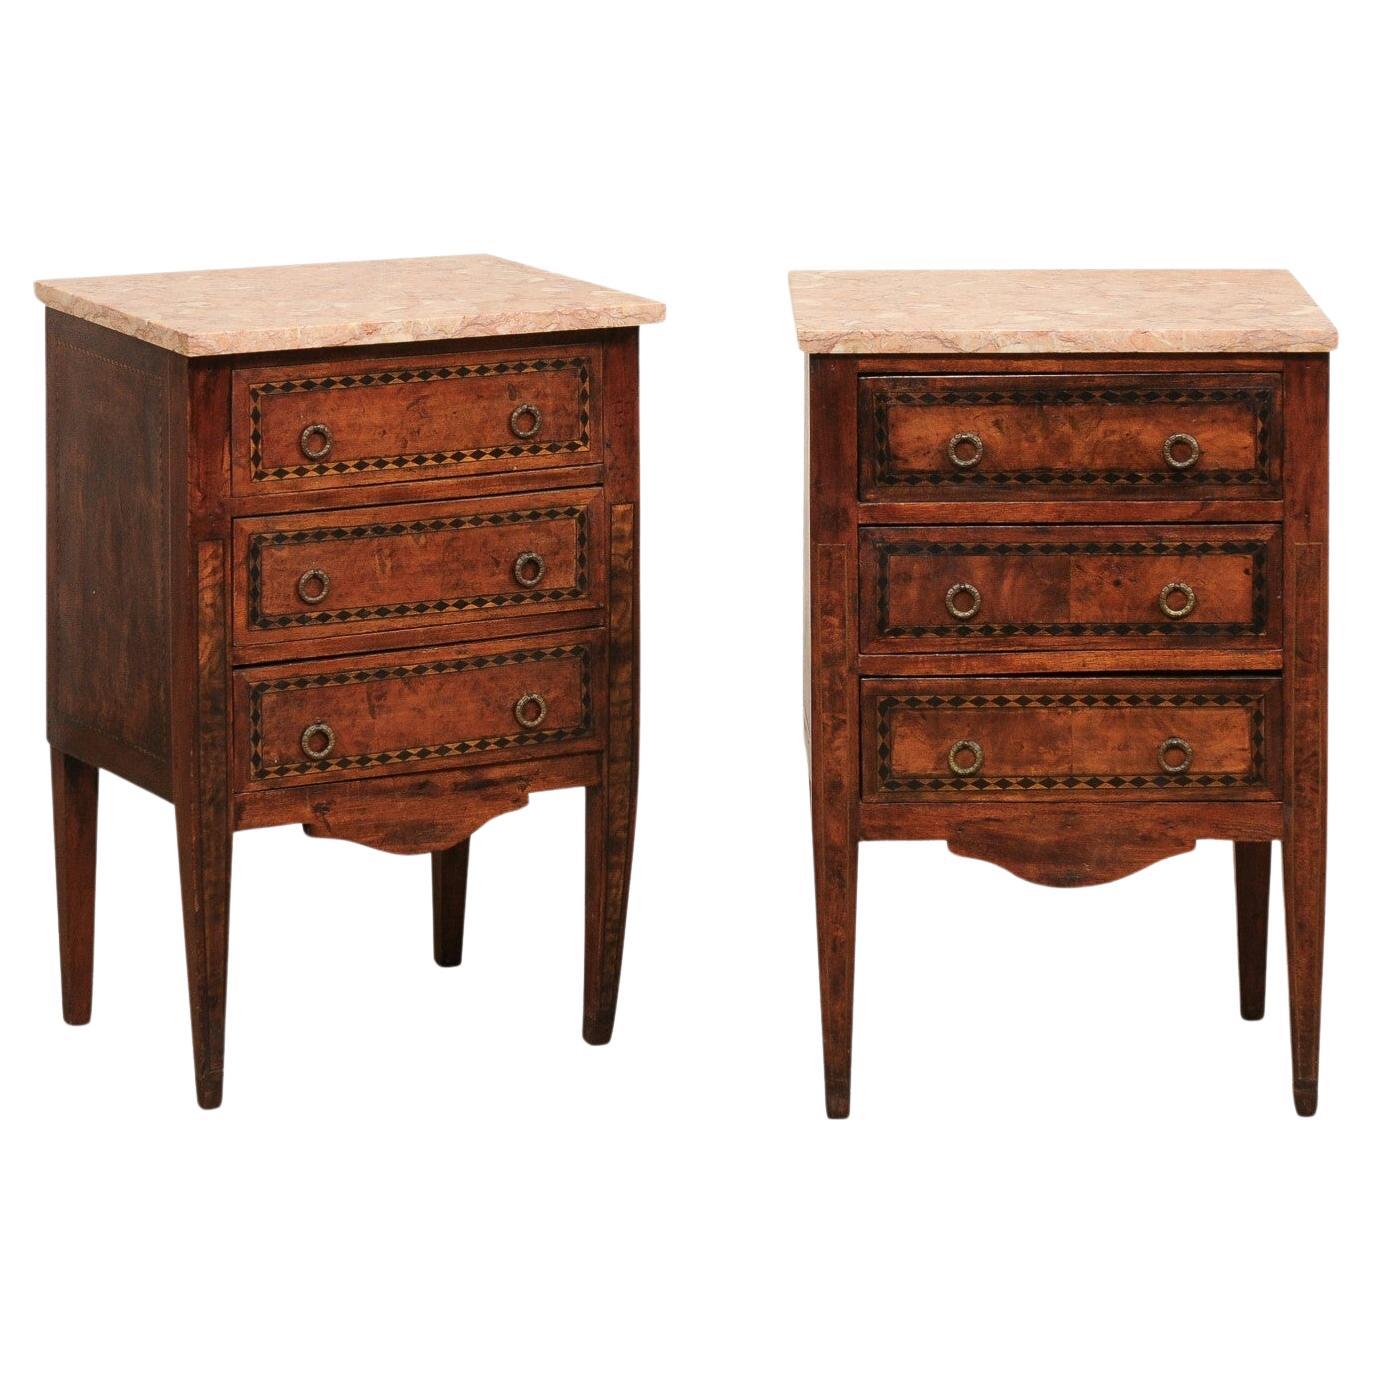 Italian Pair of 19th C. Marble-Top Side Chests w/Marquetry Inlay Banding